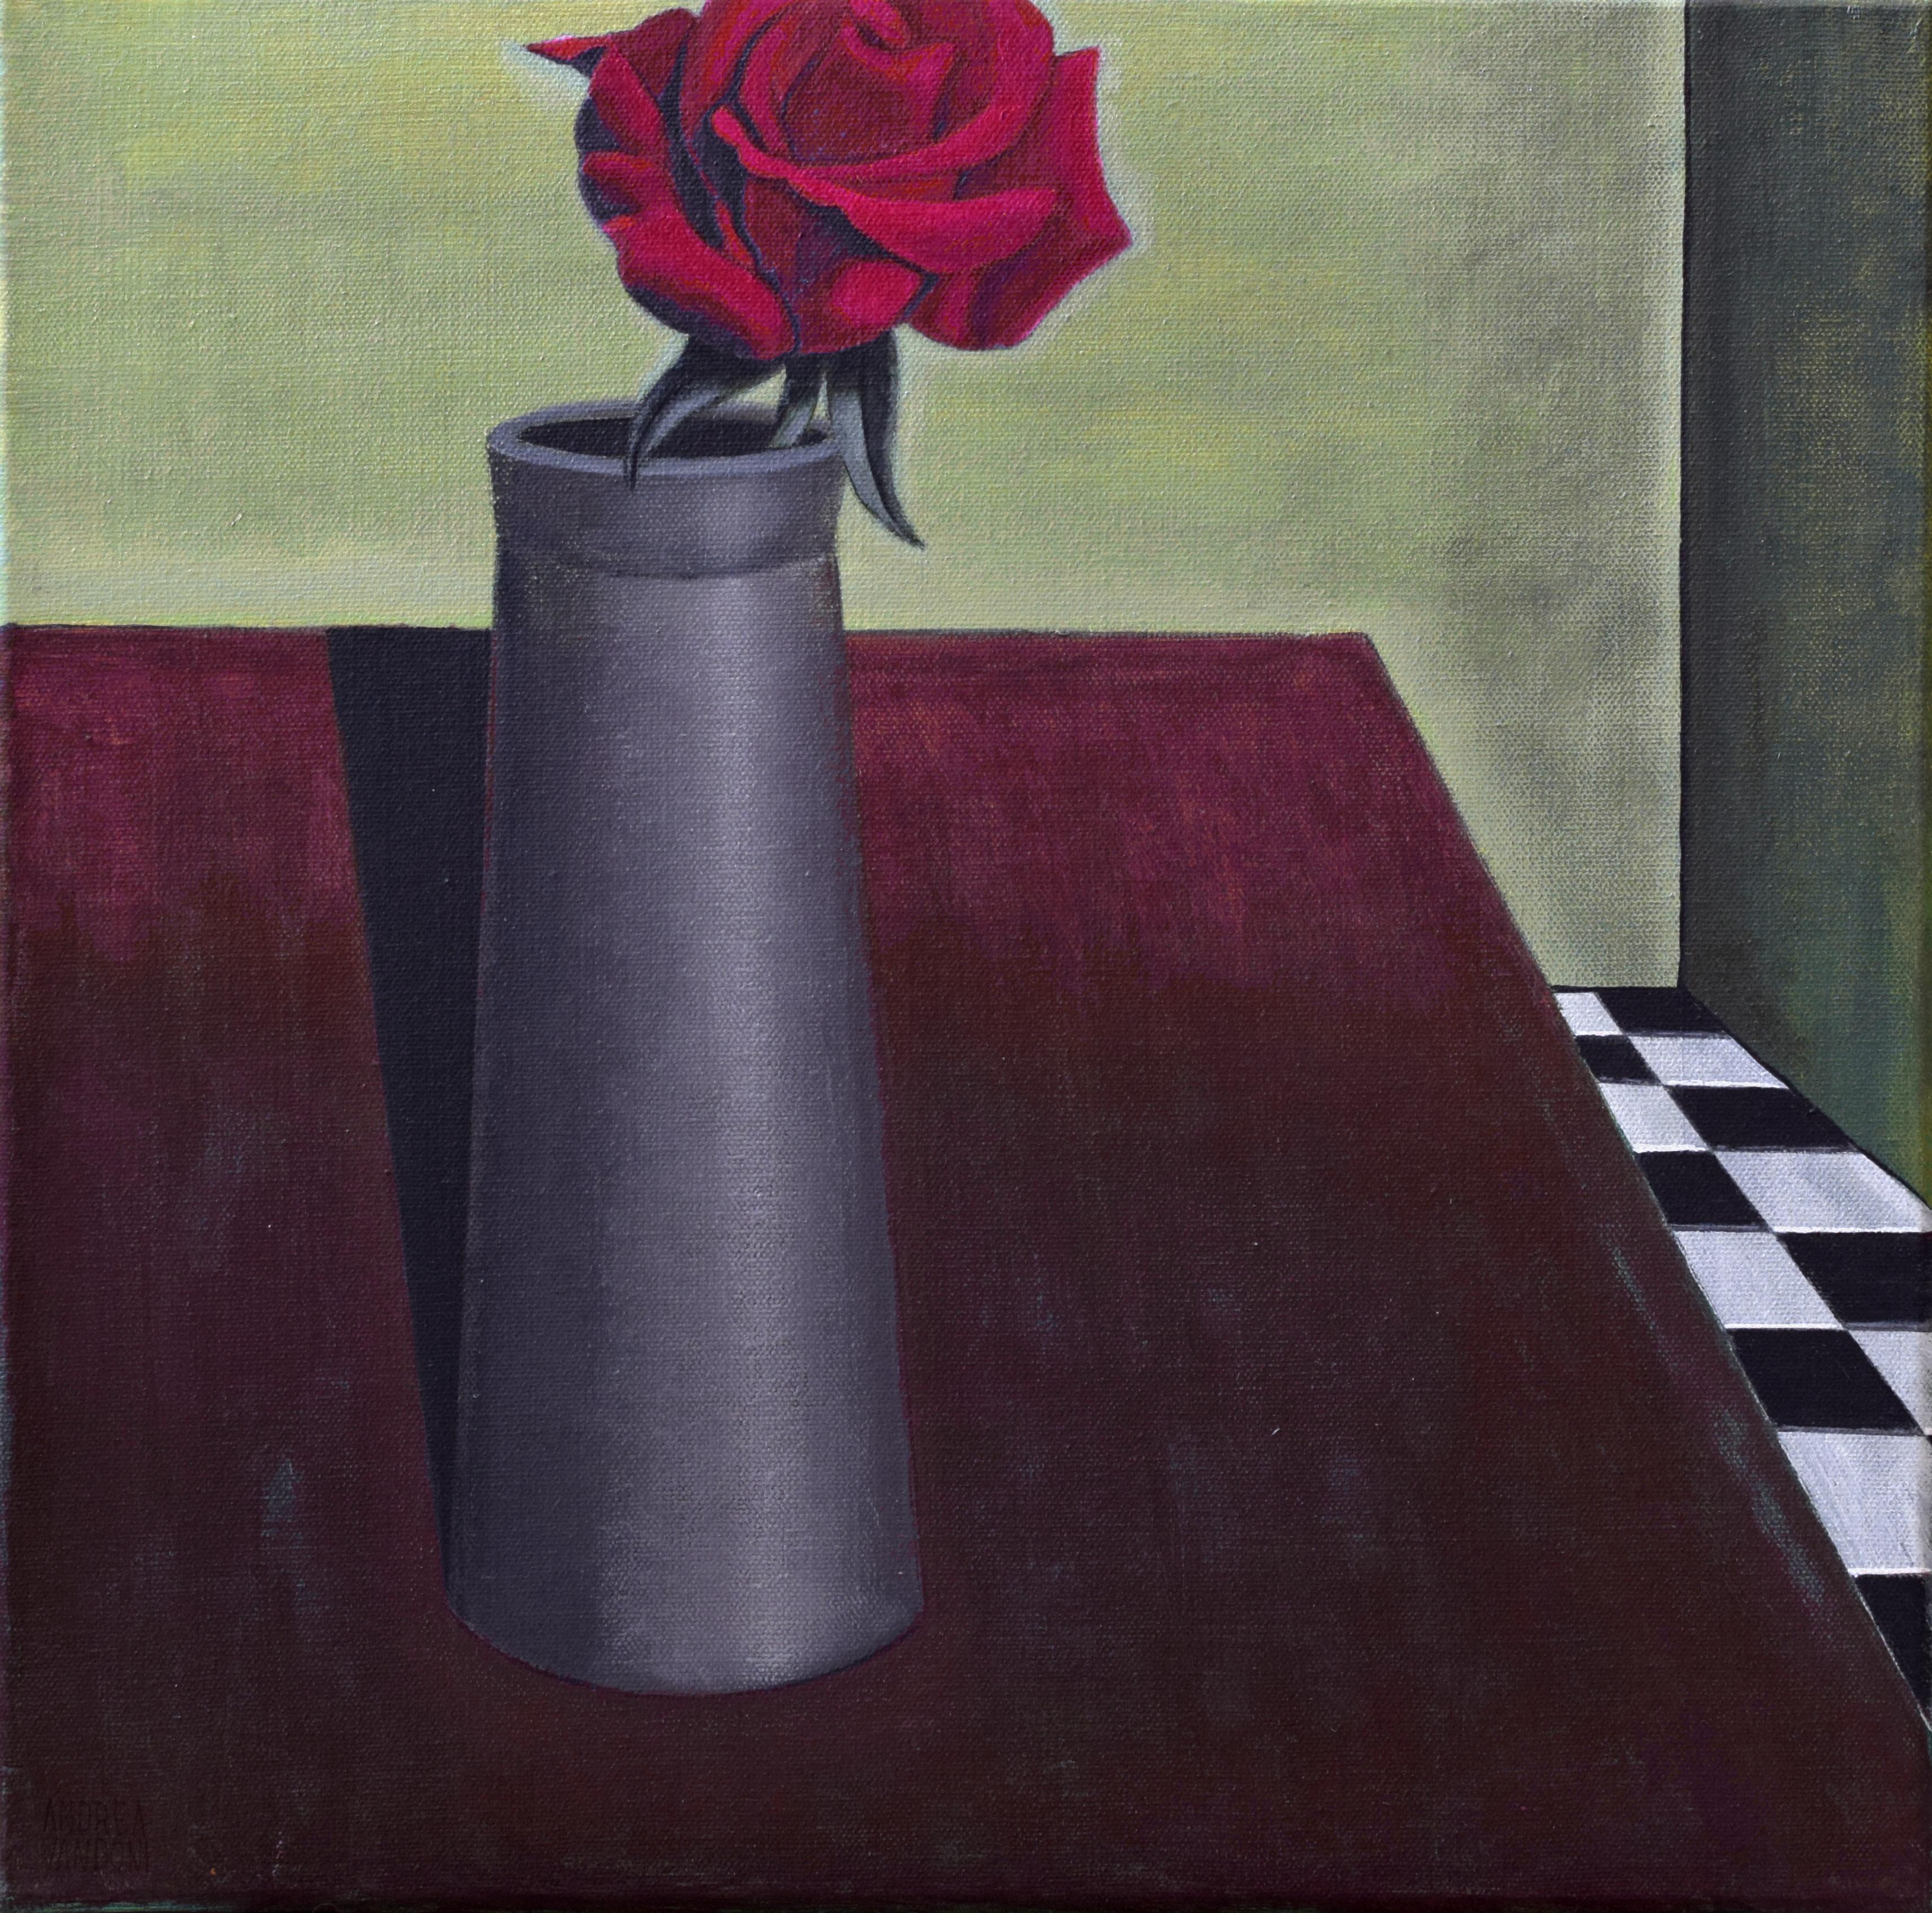 Italian Contemporary Art by Andrea Vandoni - Let’s Put Flowers In Our Chimneys 